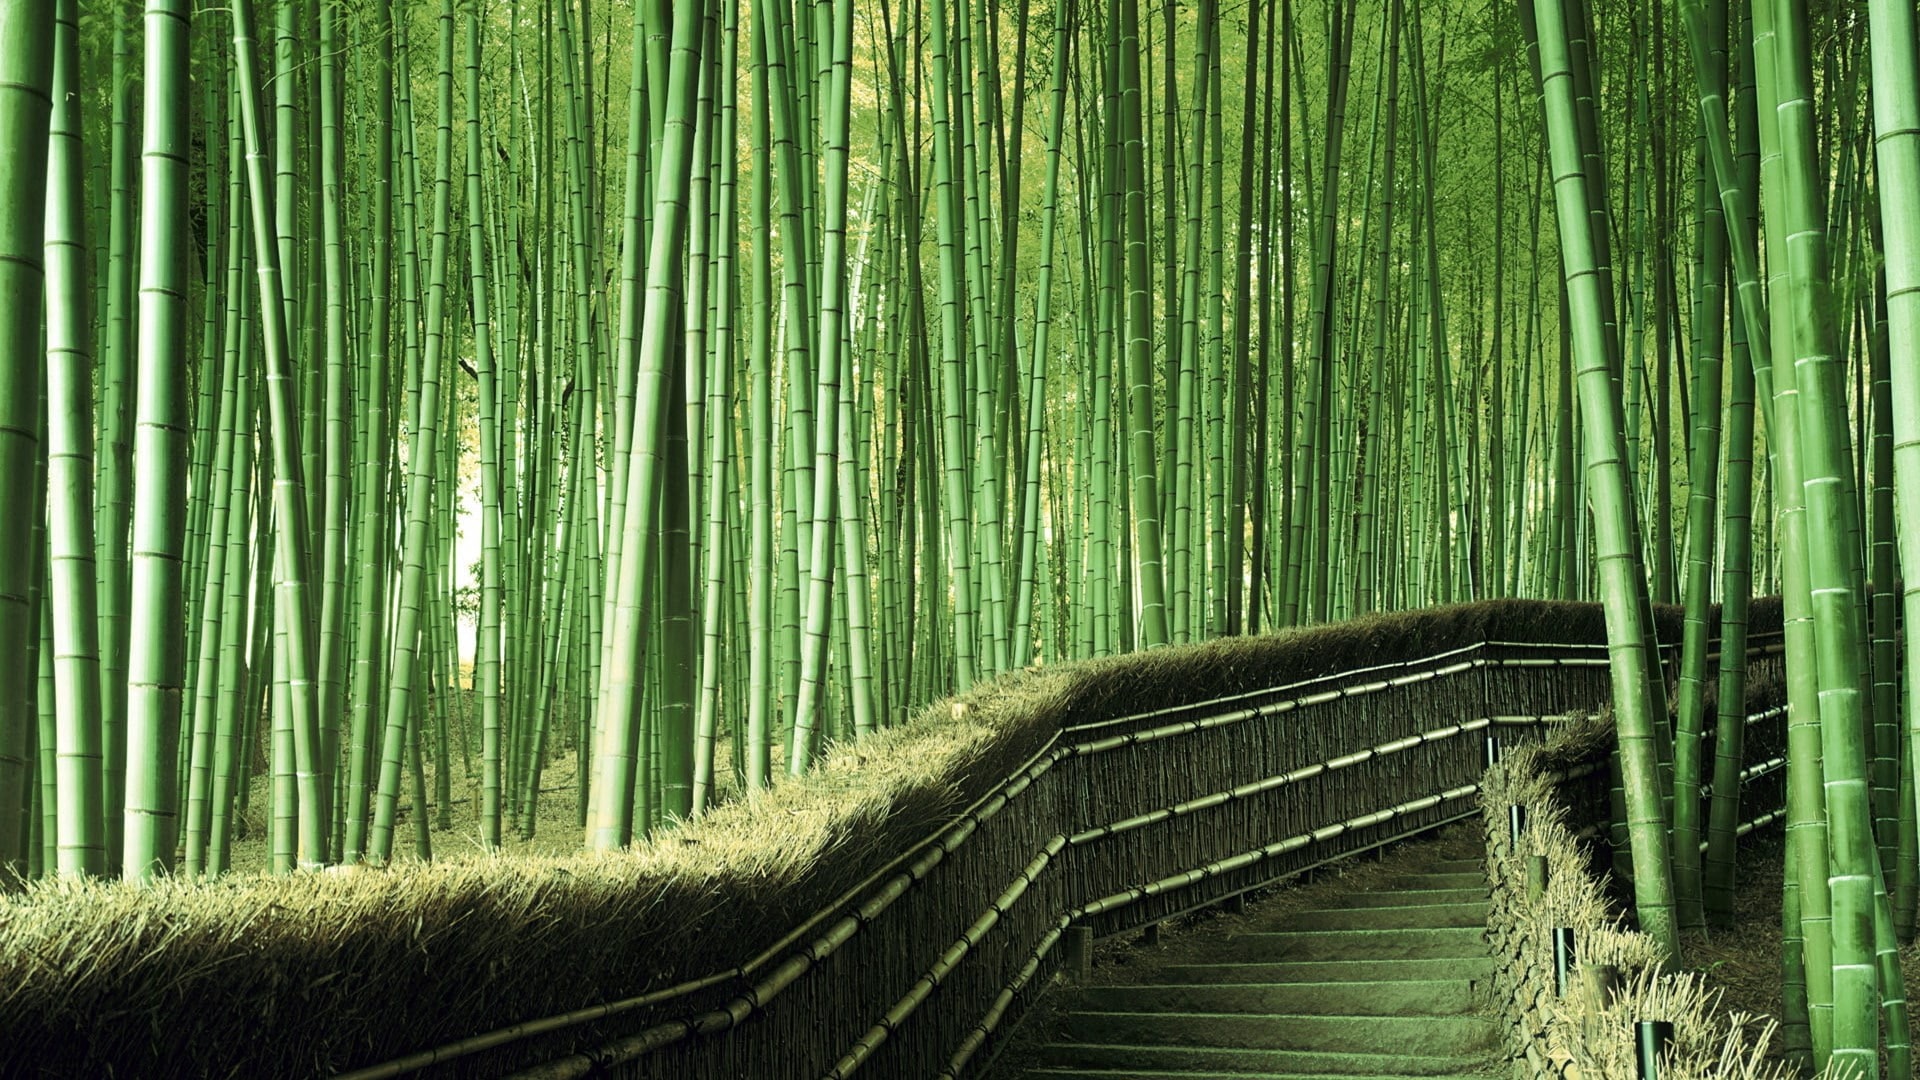 Types of bamboo by its rhizome, its growth, its size and its resistance.